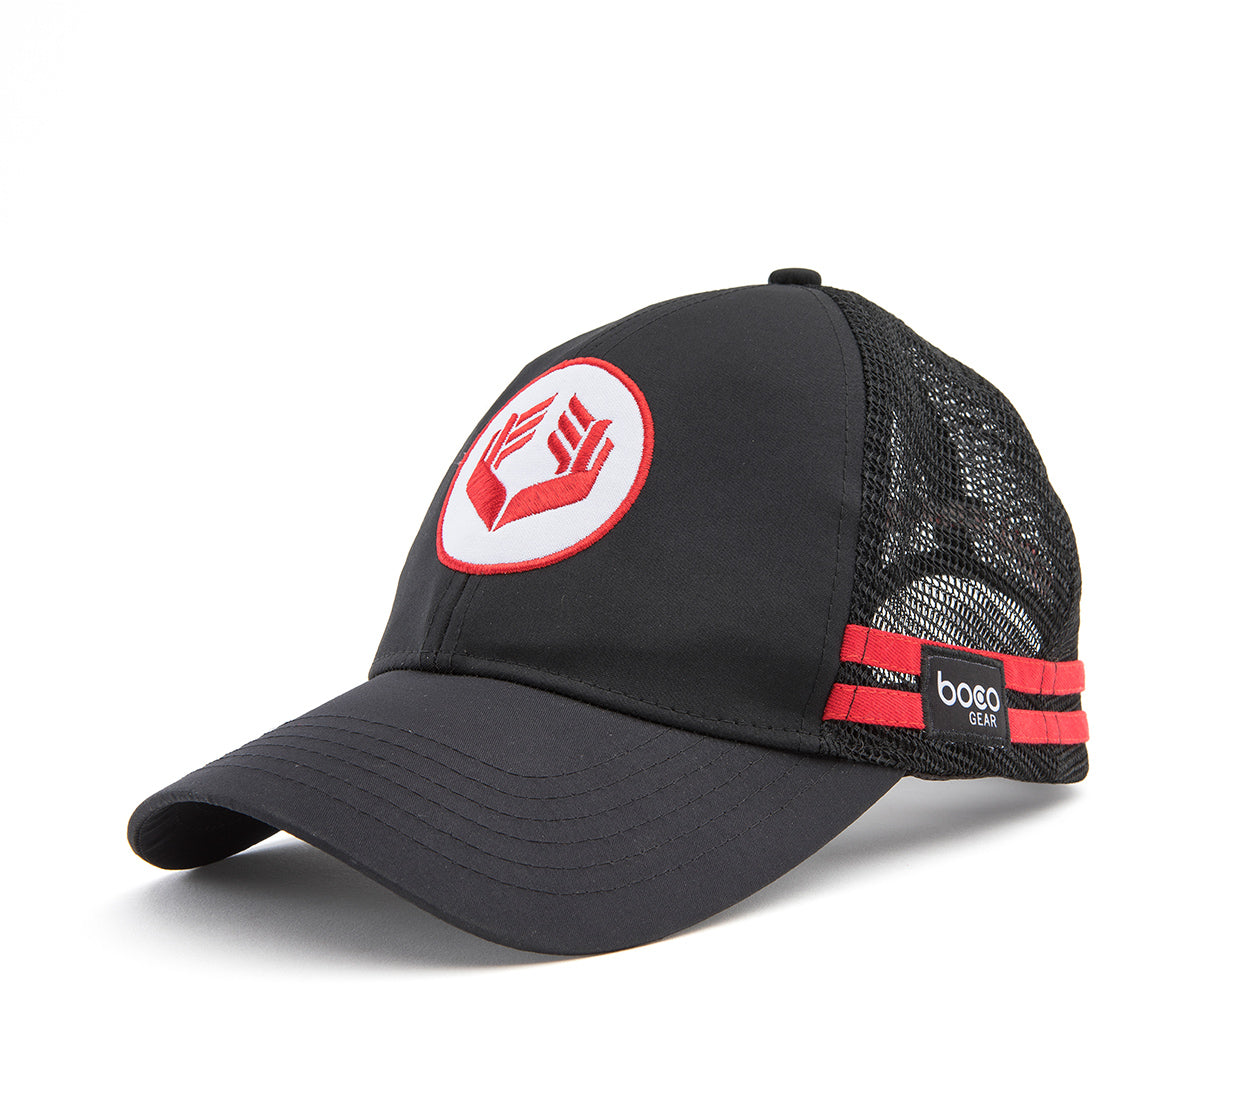 Roll Recovery Technical Trucker Hat